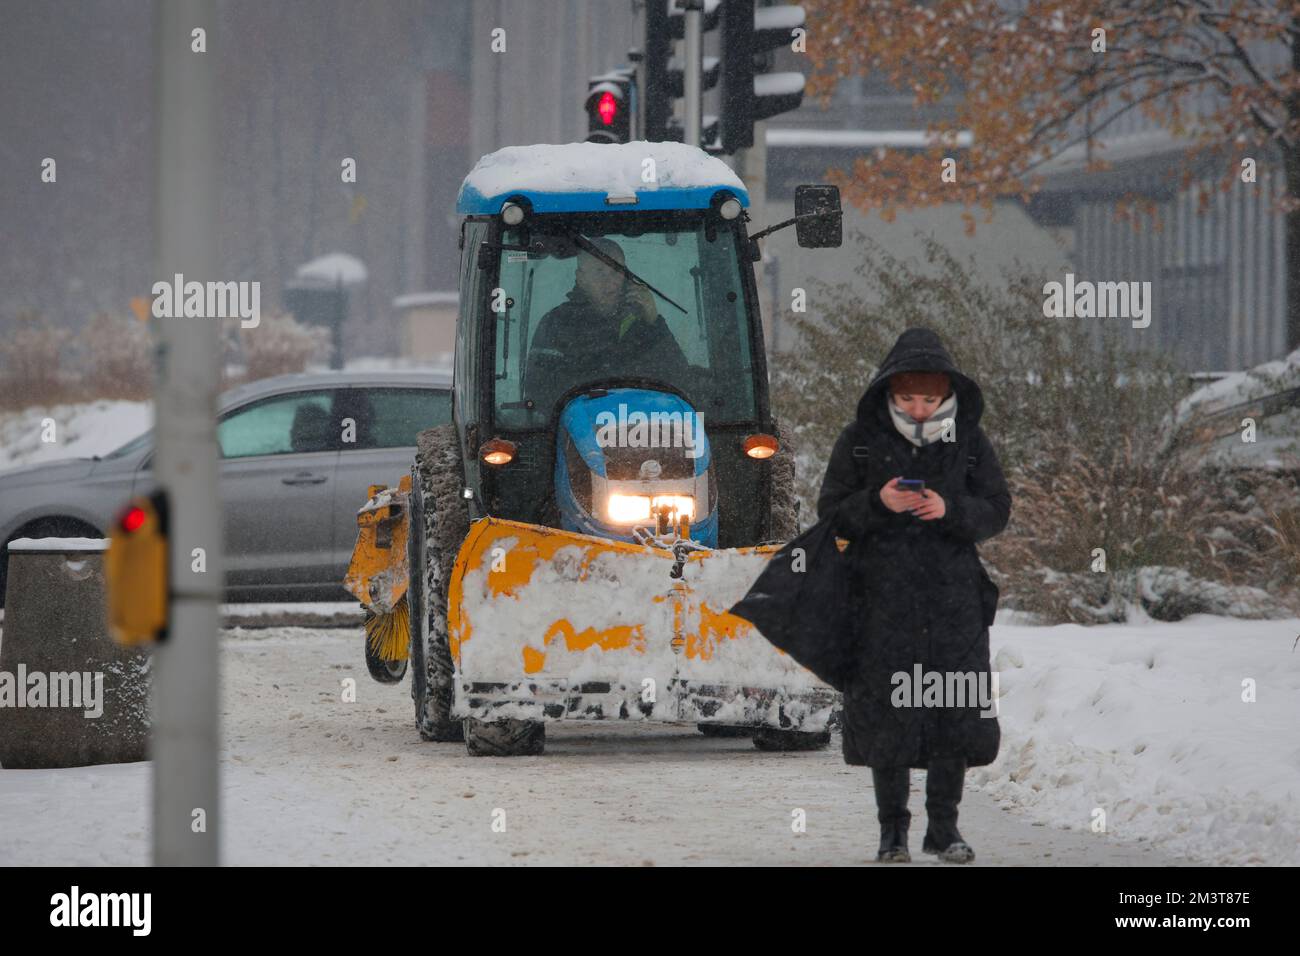 Warsaw, Poland. 16th Dec, 2022. A man operating a snowplow is seen in Warsaw, Poland on 16 December, 2022. Poland sees heavy snowfall for the sixth consequetive day with nightly temperatures in some ares of the country falling to nearly minus 20 degrees Centigrade. (Photo by Jaap Arriens/Sipa USA) Credit: Sipa USA/Alamy Live News Stock Photo